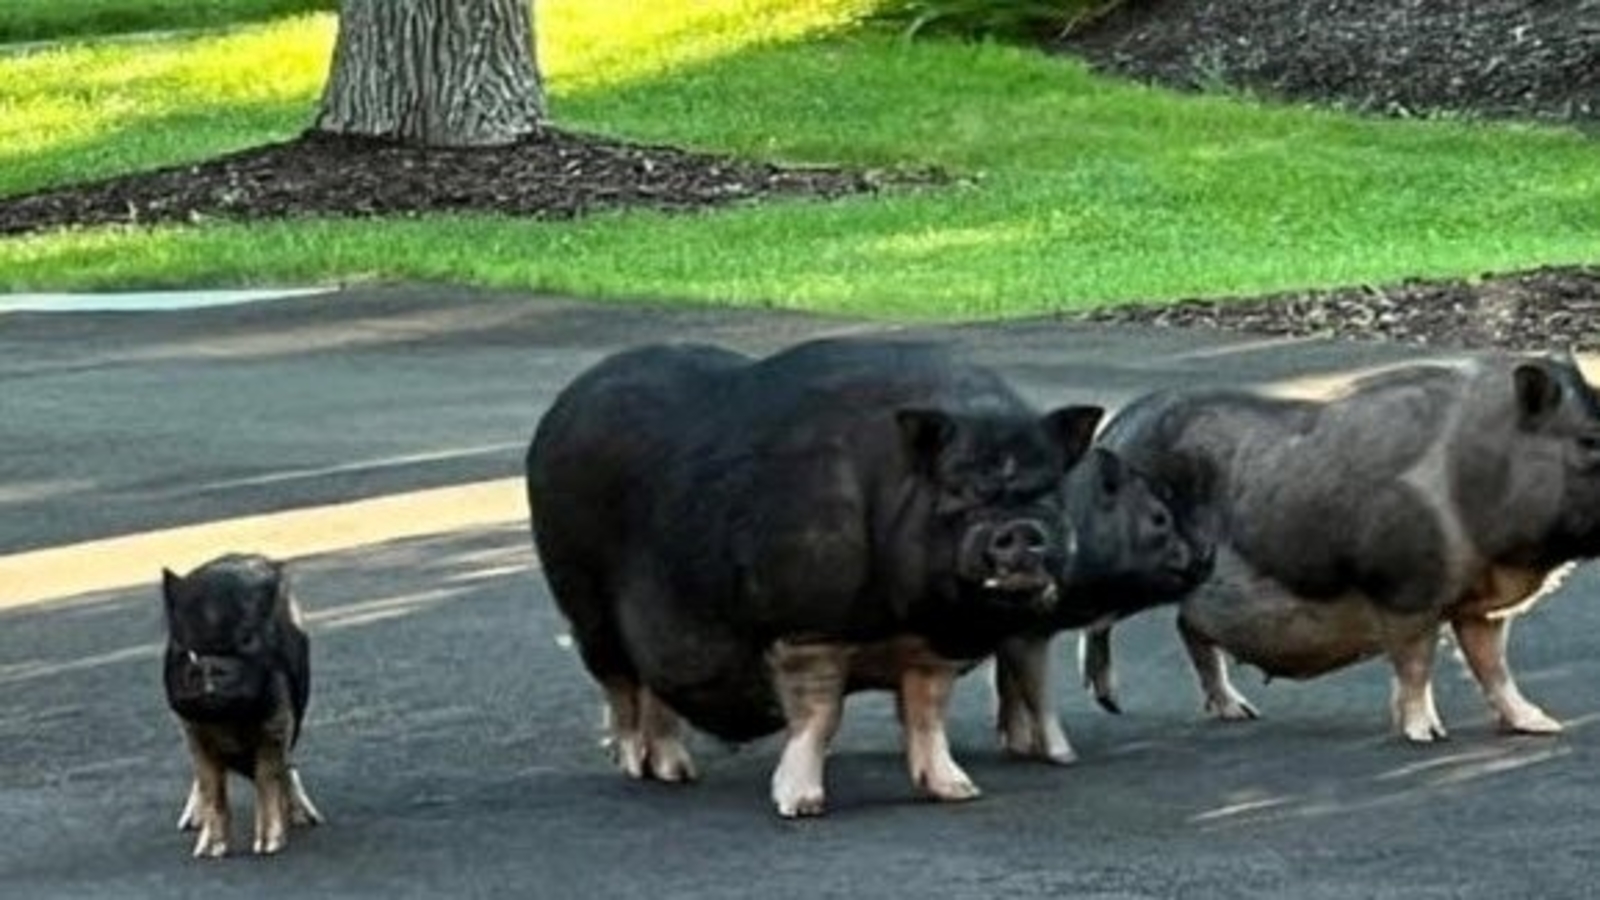   
																Family of pigs spotted roaming in Wayne, Illinois 
															 